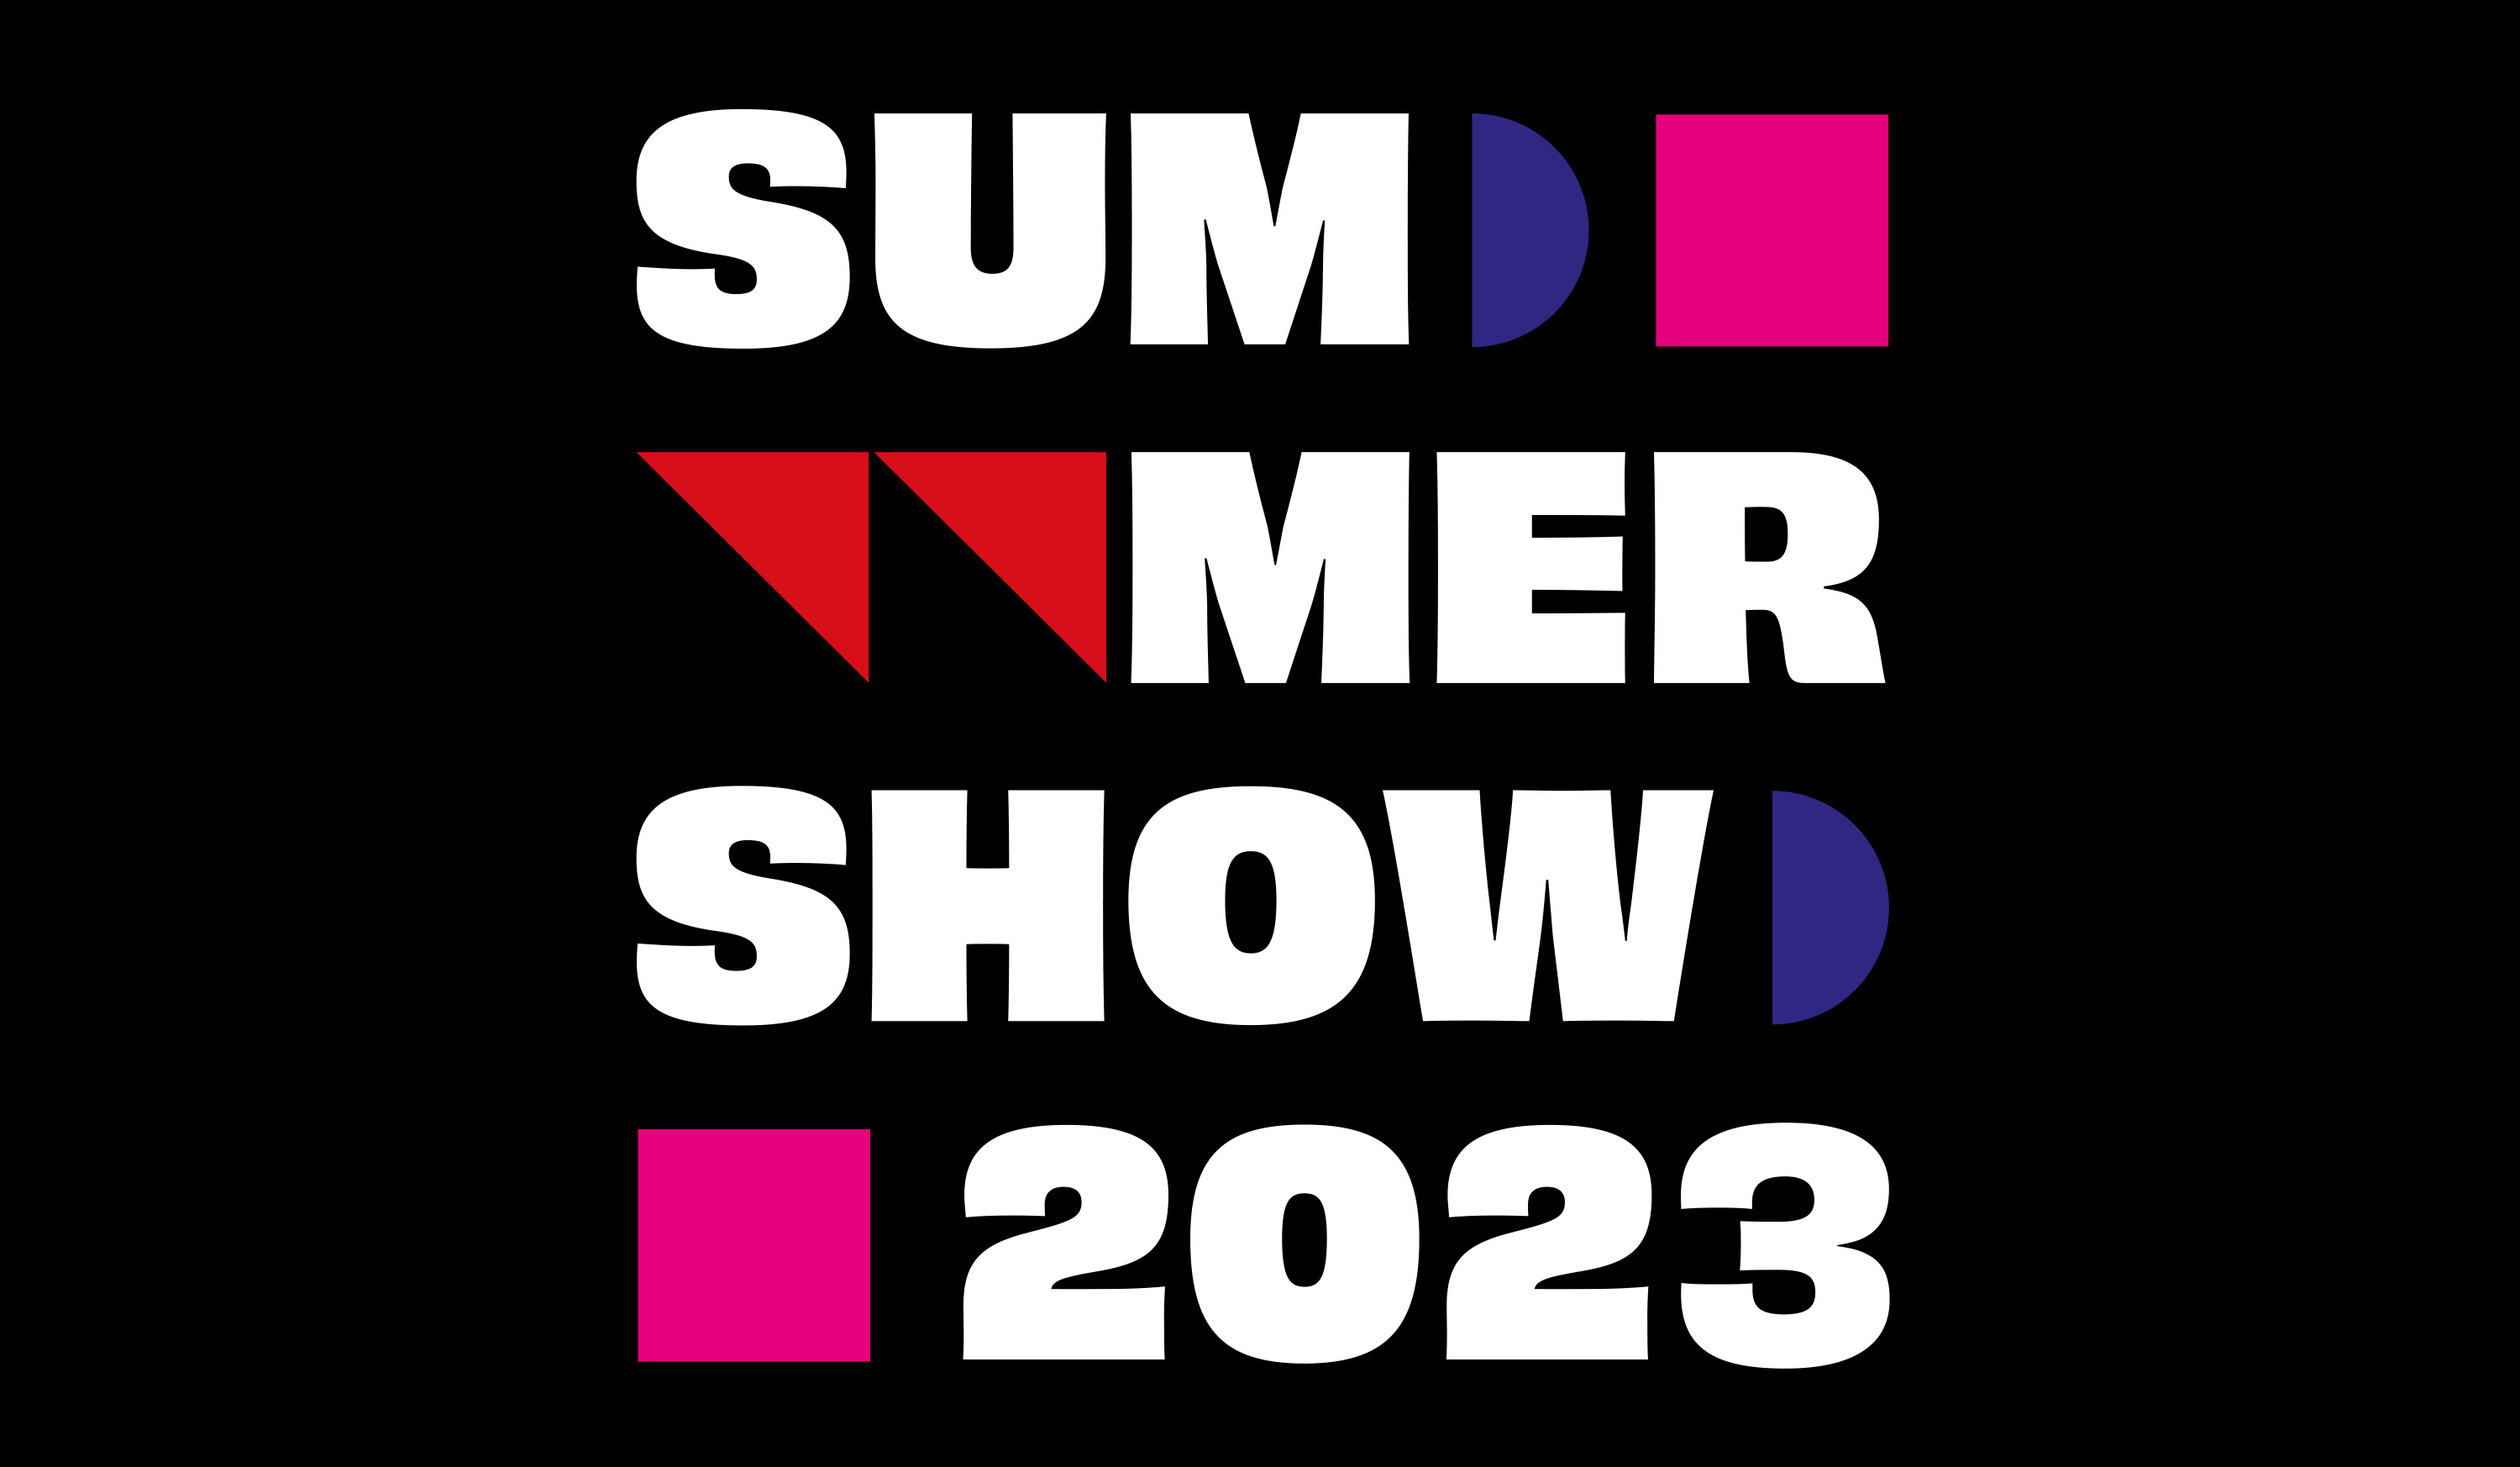 text reading 'Summer Show 2022' surrounded by abstract shapes